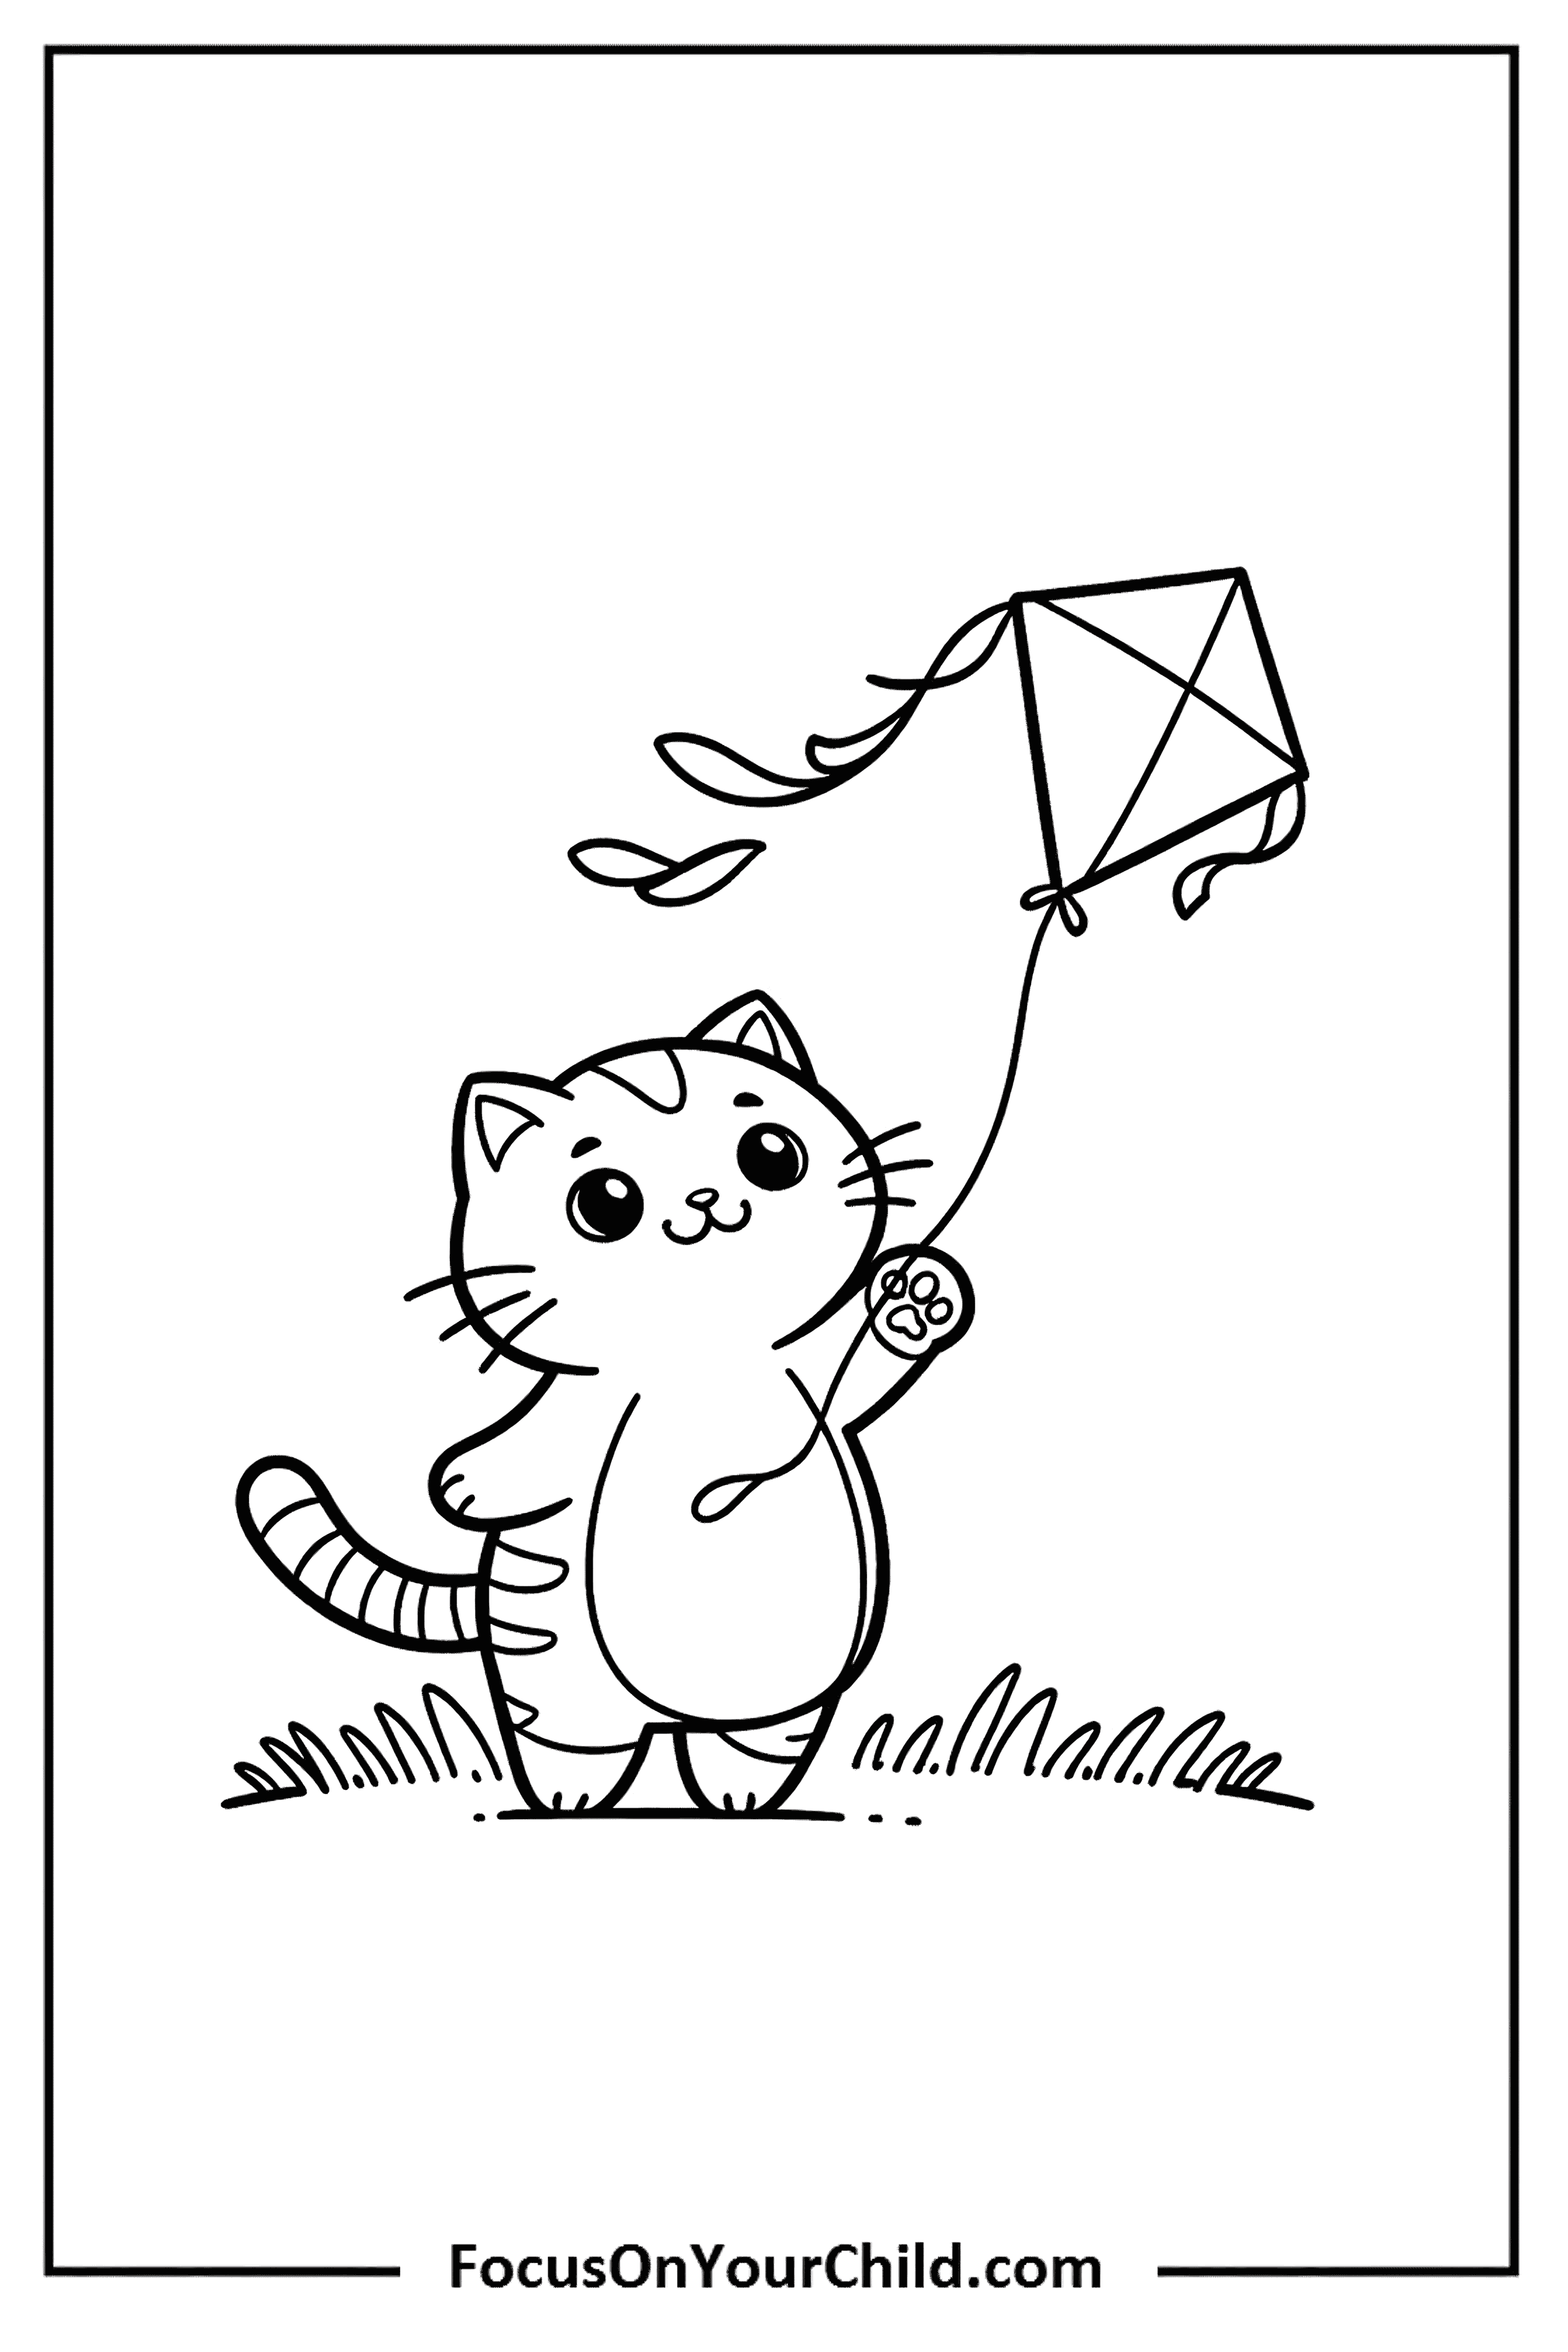 Cute cat flying a kite in a simple black-and-white cartoon drawing.